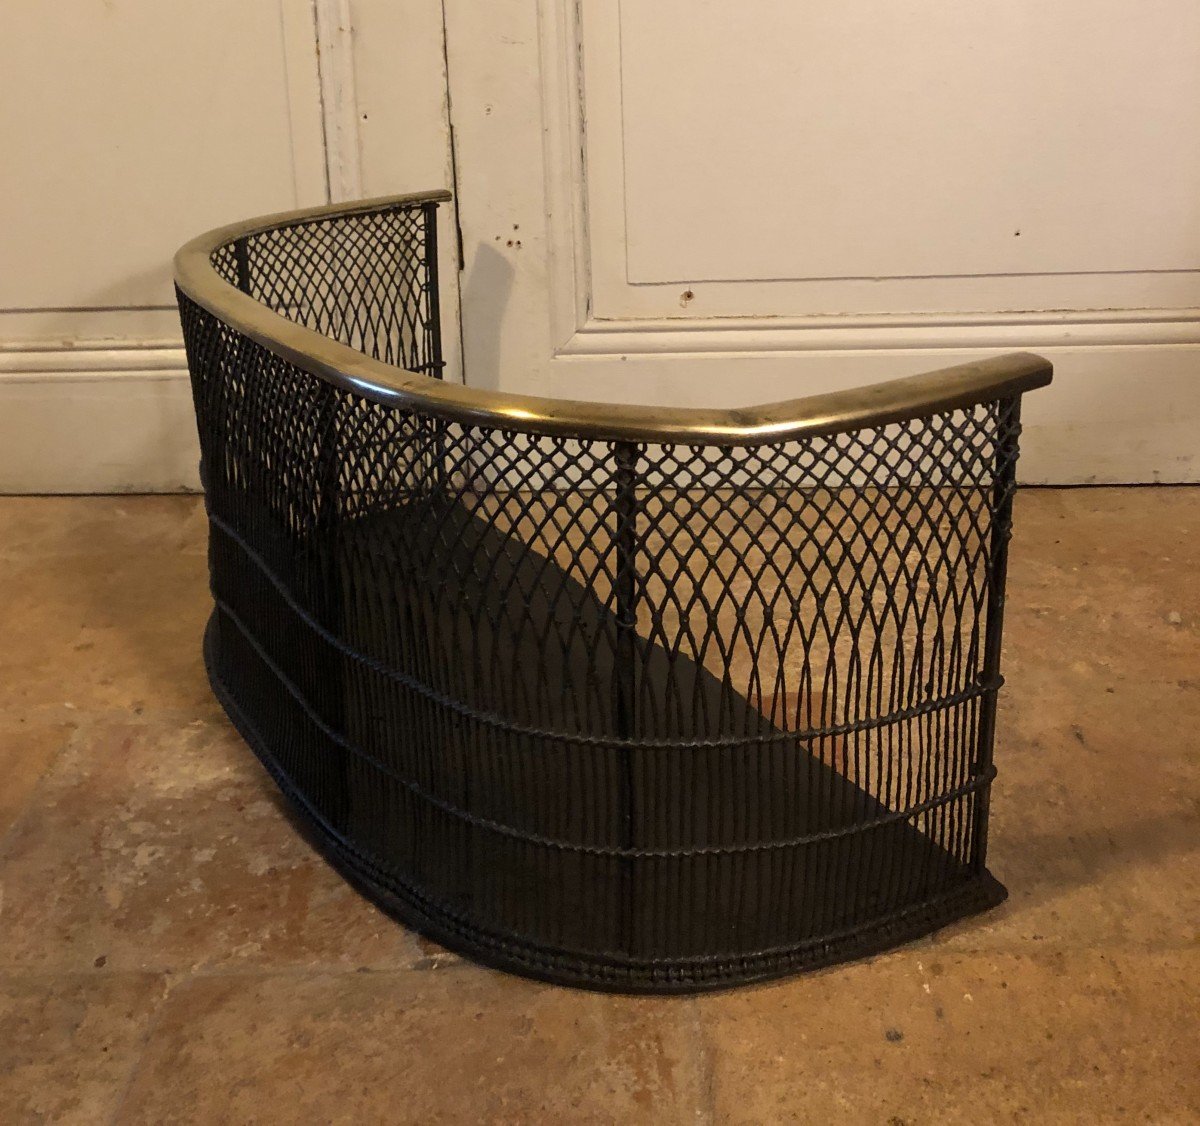 Small Fire Screen In Wire And Bronze 19th Century -photo-3